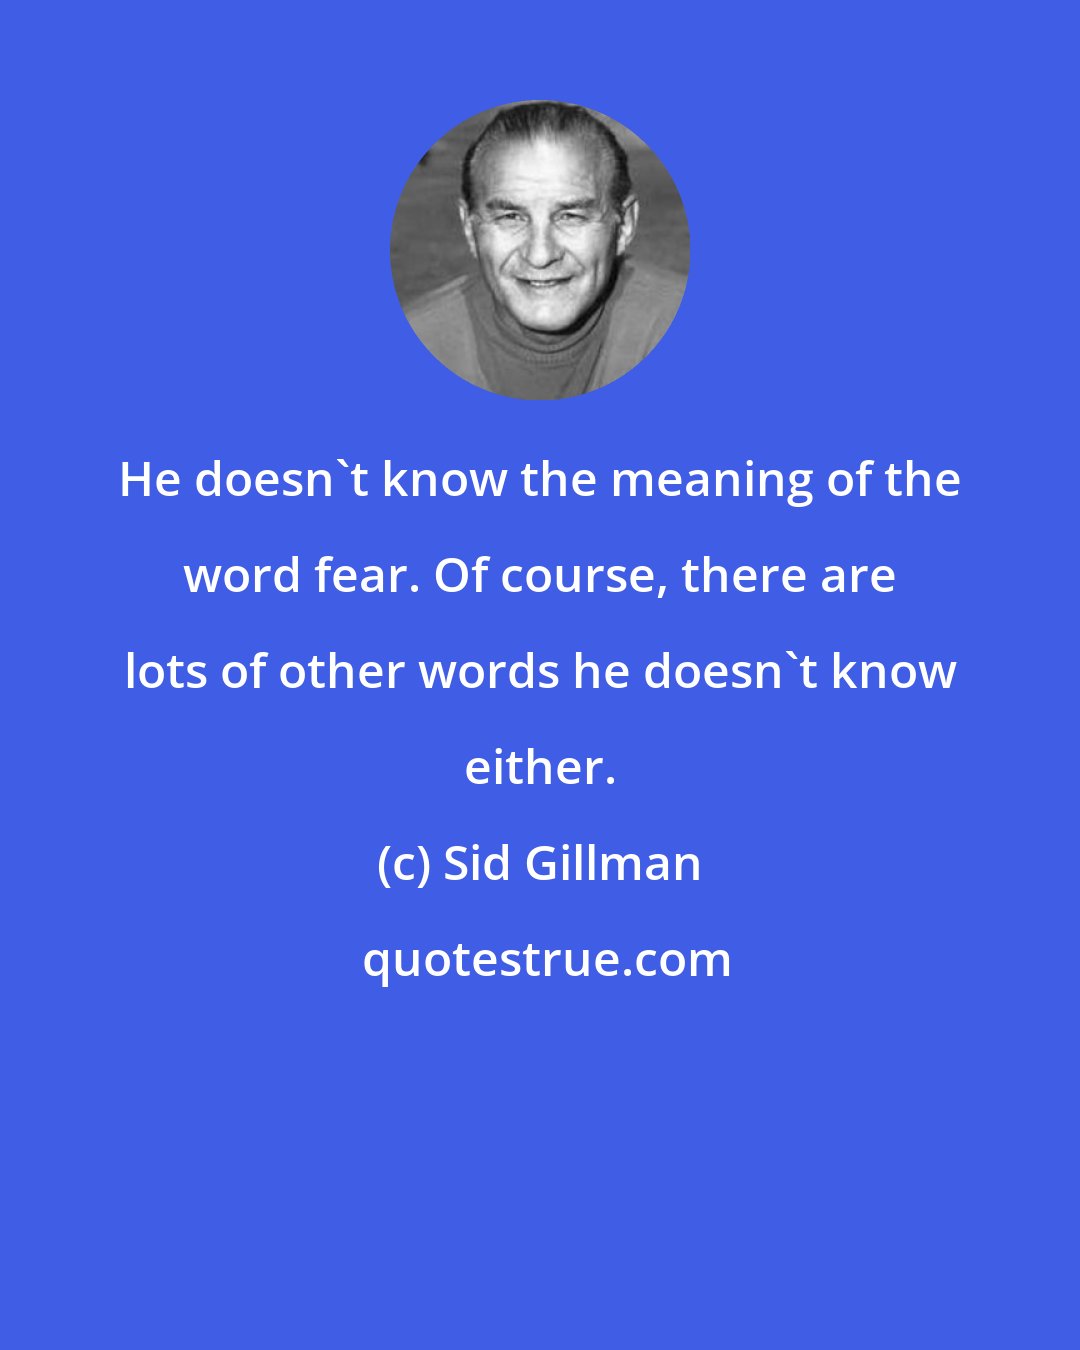 Sid Gillman: He doesn't know the meaning of the word fear. Of course, there are lots of other words he doesn't know either.